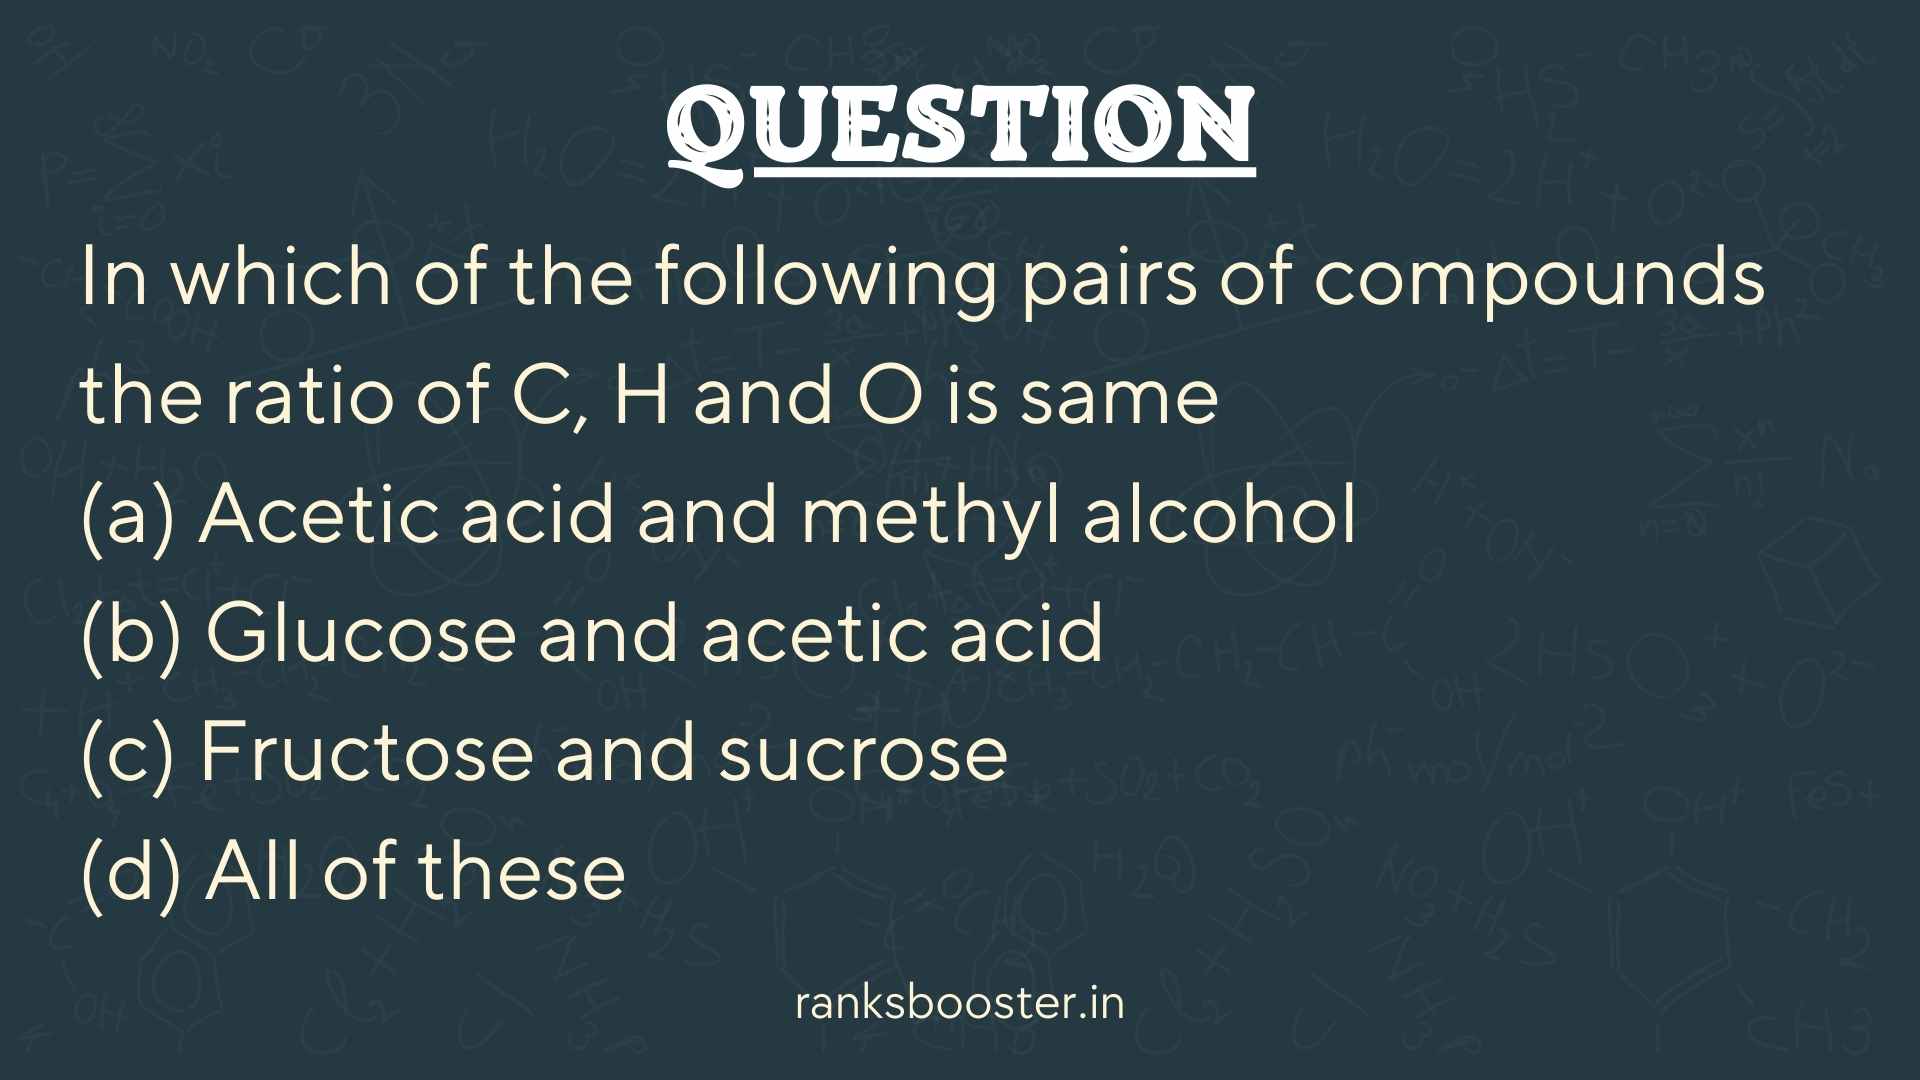 Question: In which of the following pairs of compounds the ratio of C, H and O is same (a) Acetic acid and methyl alcohol (b) Glucose and acetic acid (c) Fructose and sucrose (d) All of these